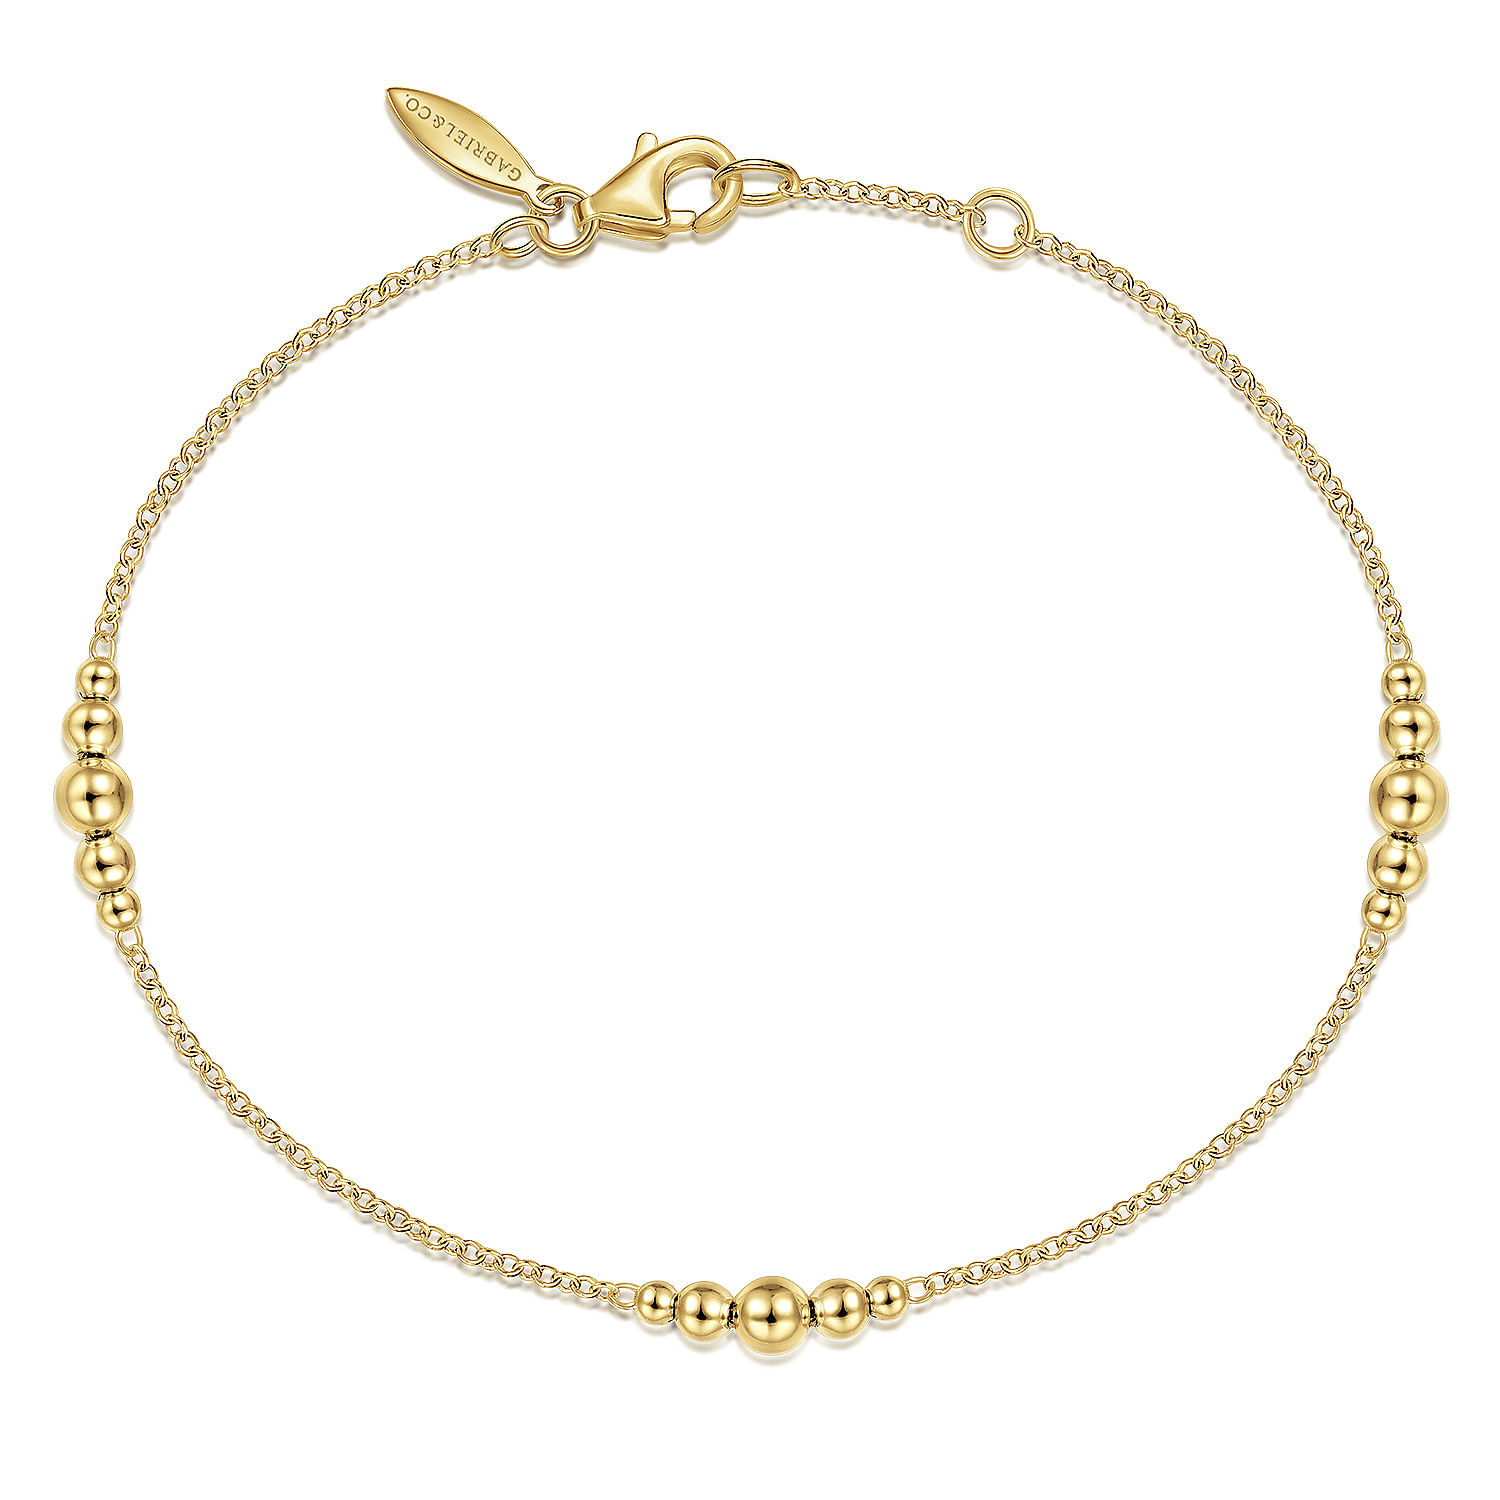 14K Yellow Gold Chain Bracelet with Graduating Bead Stations